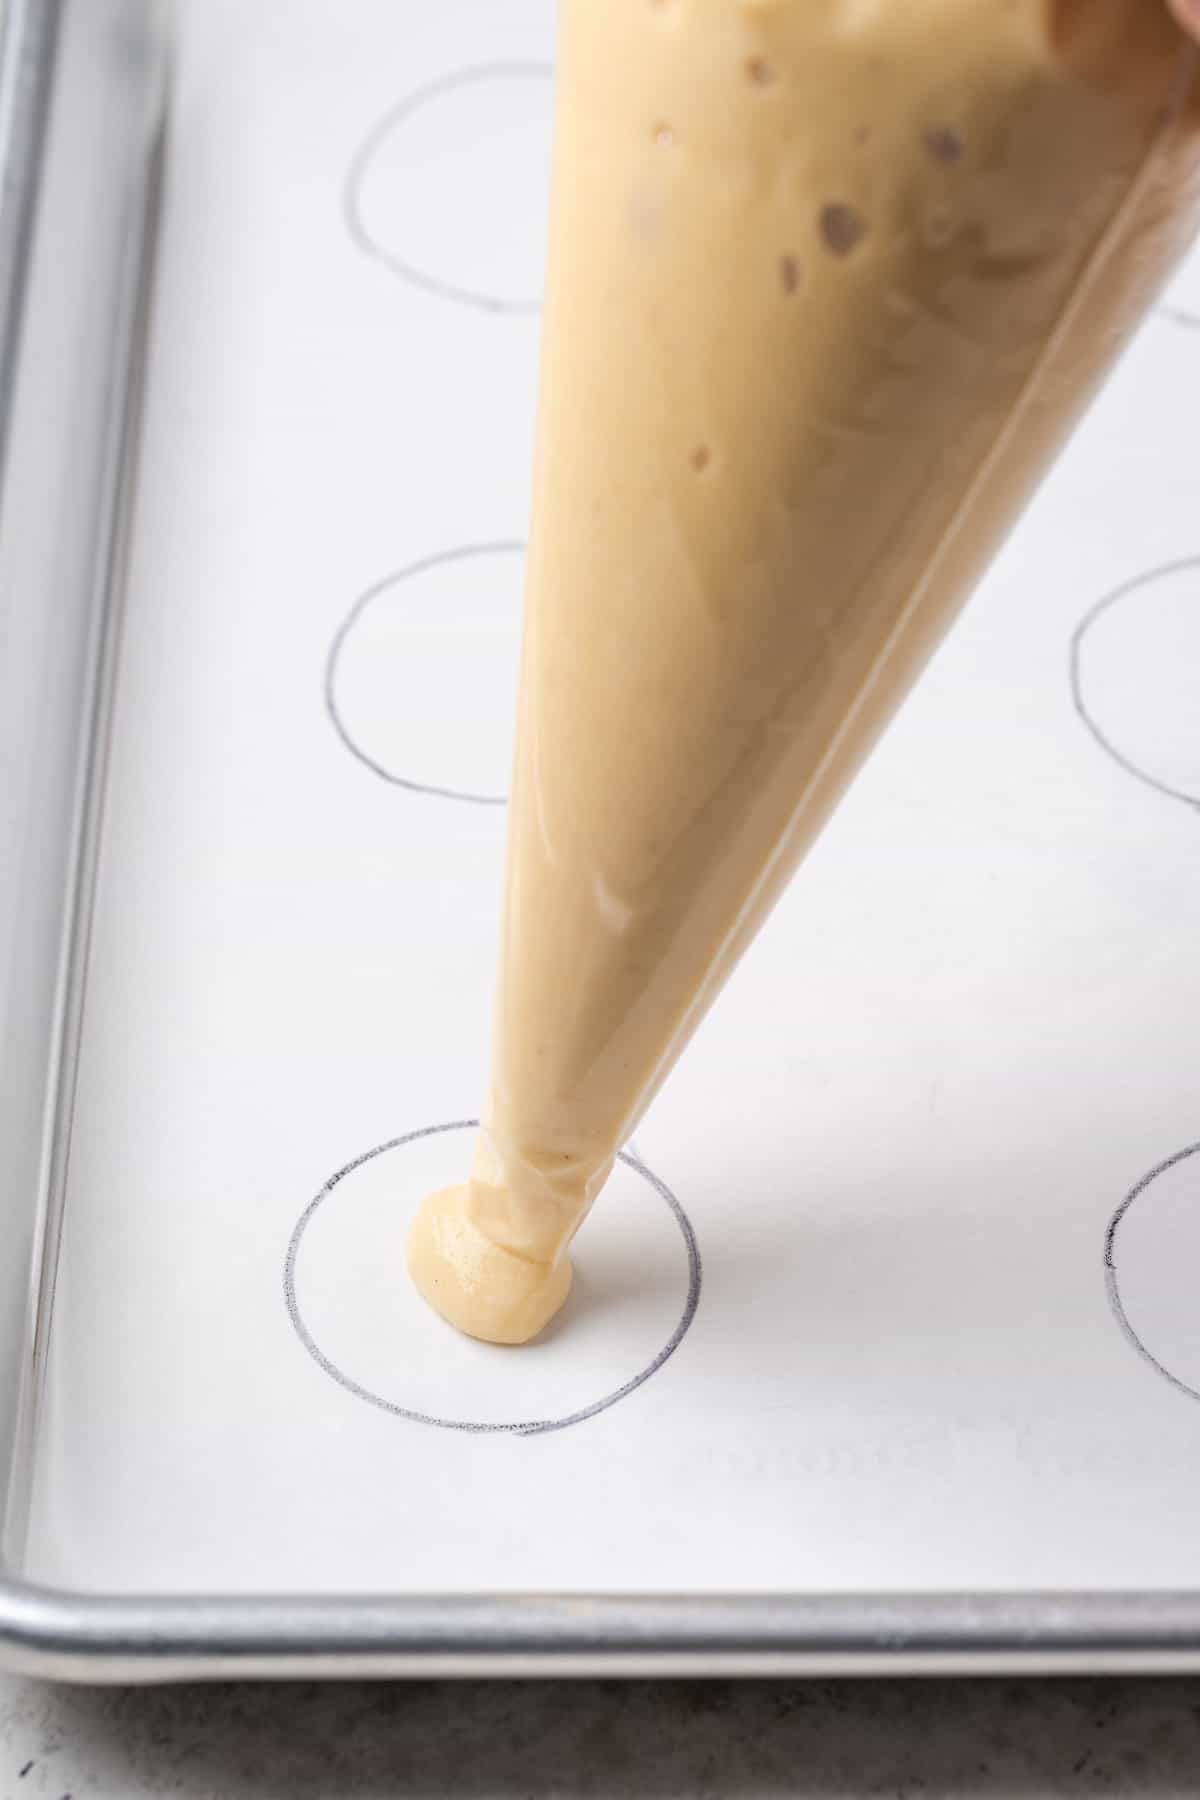 A piping bag pipes gluten-free pate a choux paste into a circle on a parchment-lined baking sheet.